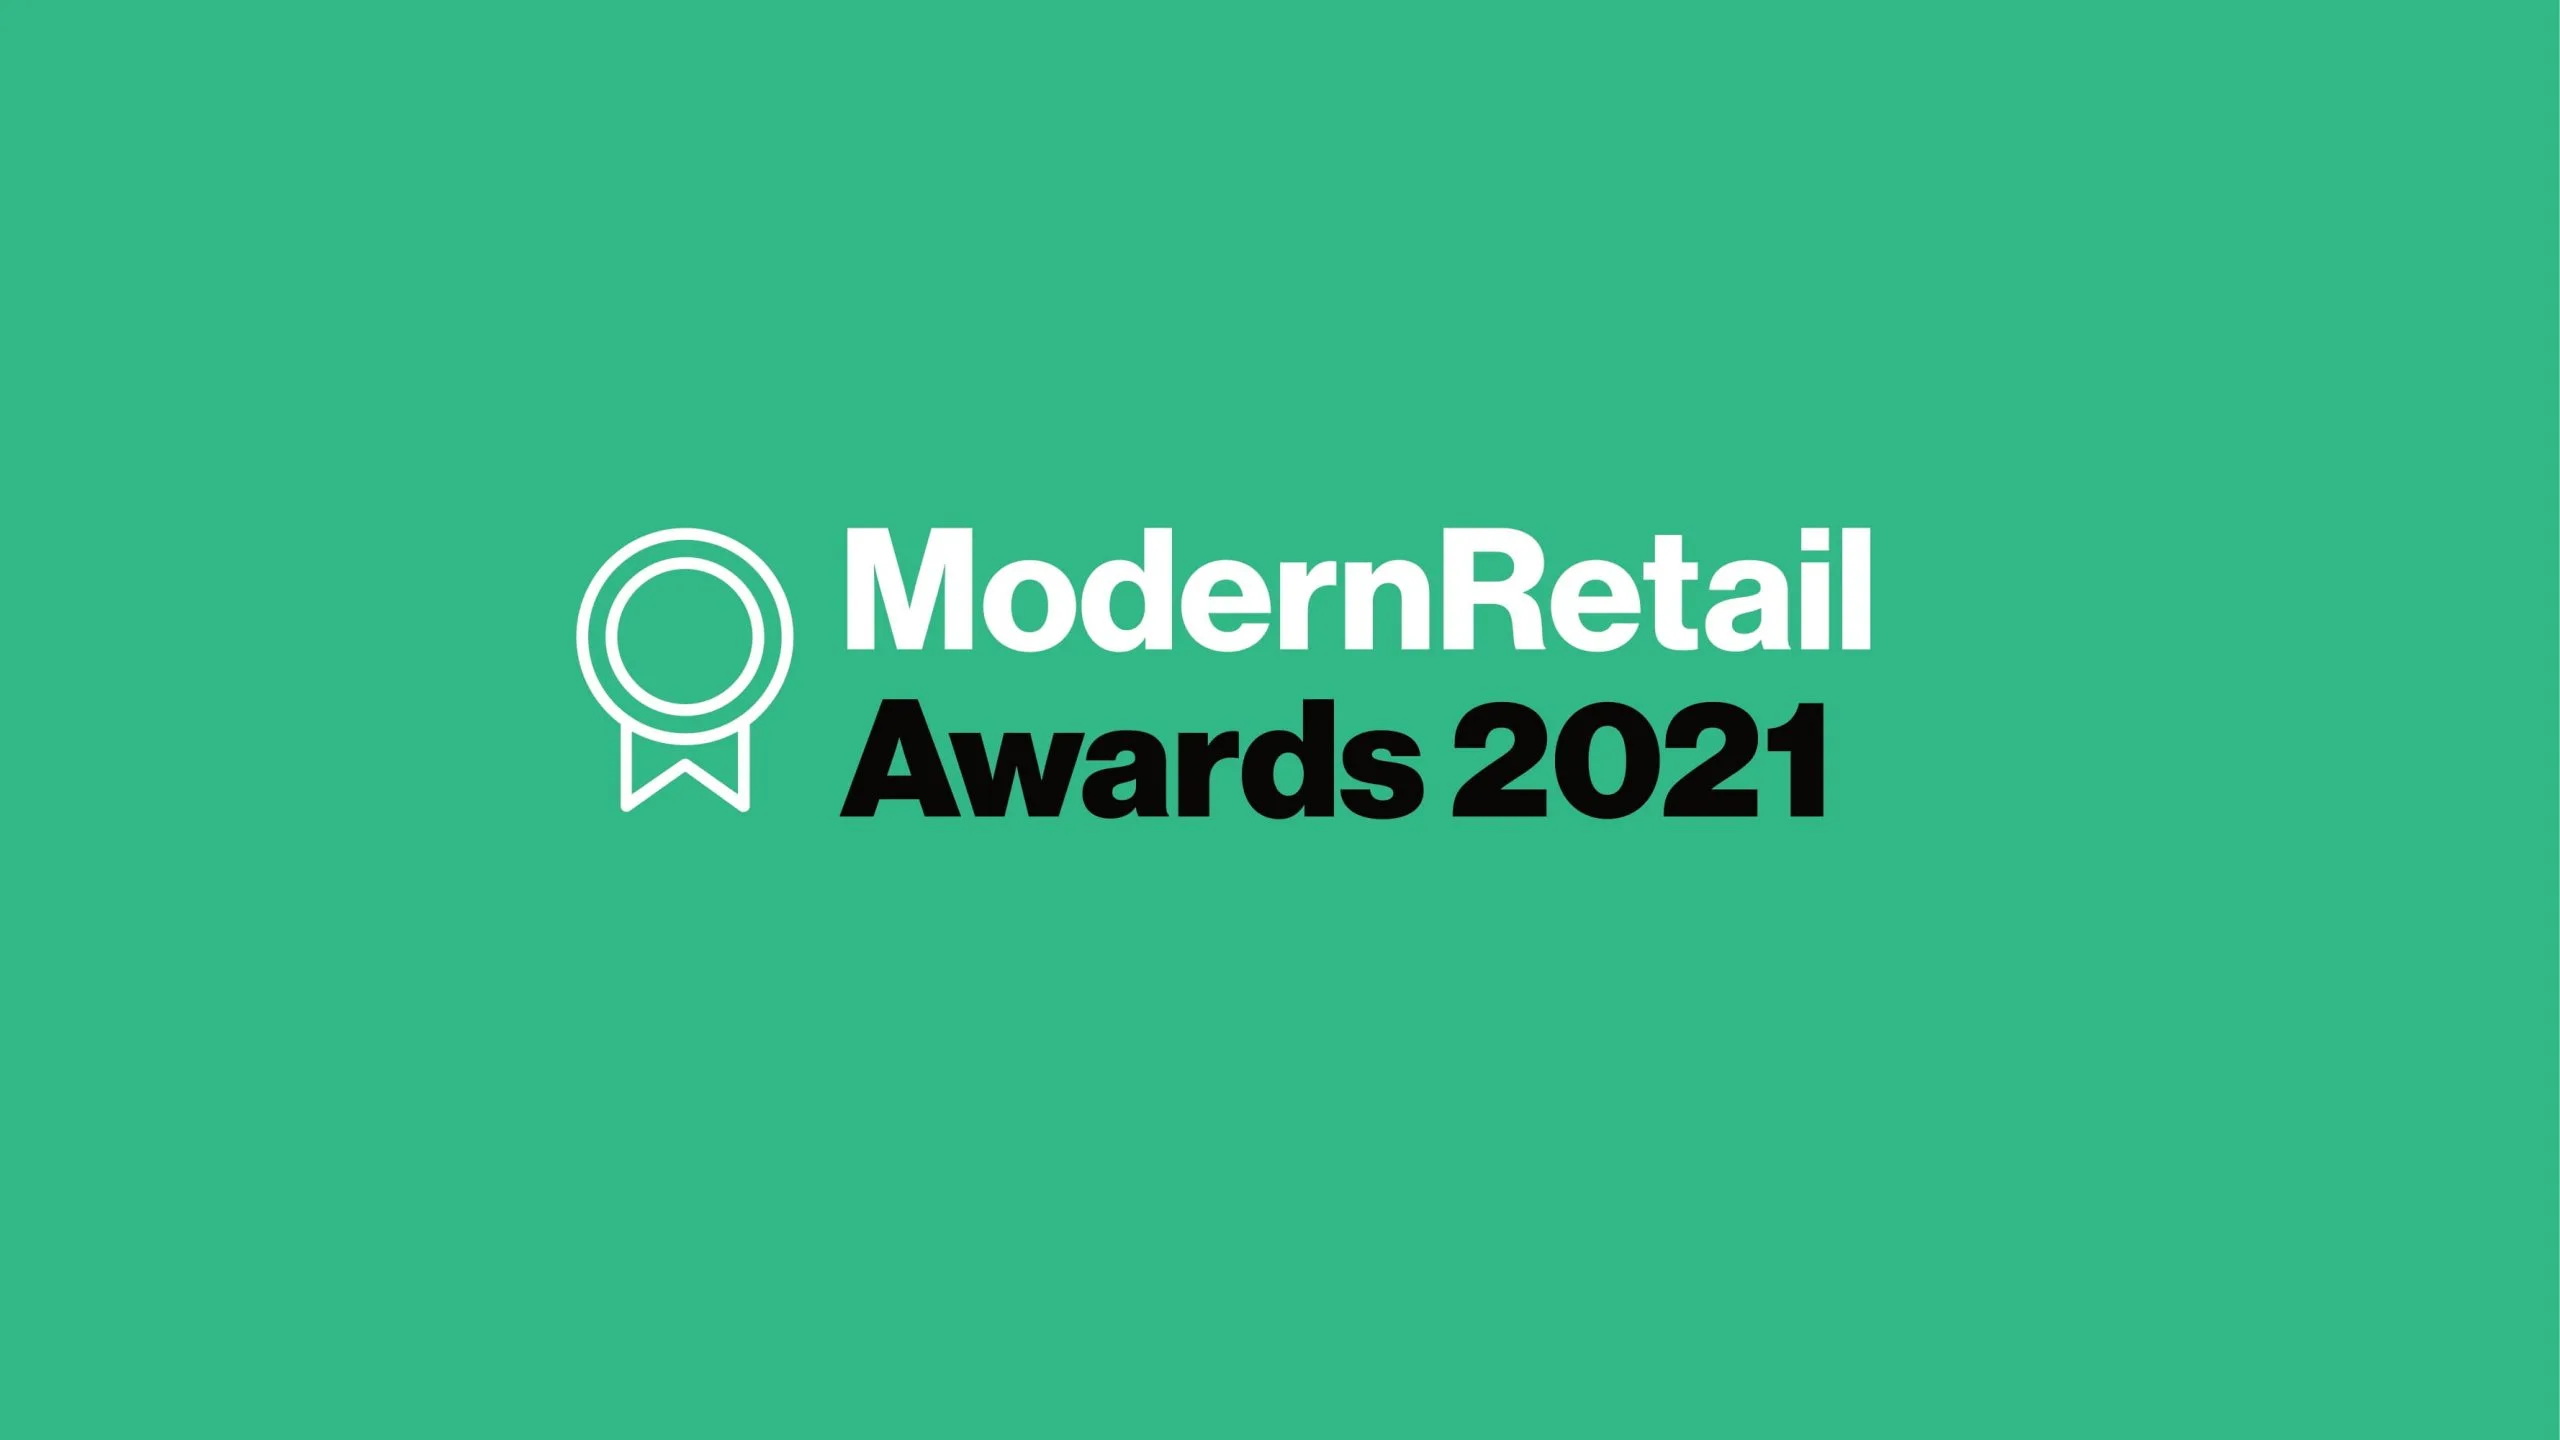 QReal, in collaboration with Bollè and M7 Innovations, Wins Best Use of Technology in the Modern Retail Awards 2021 for Augmented Reality Campaigns